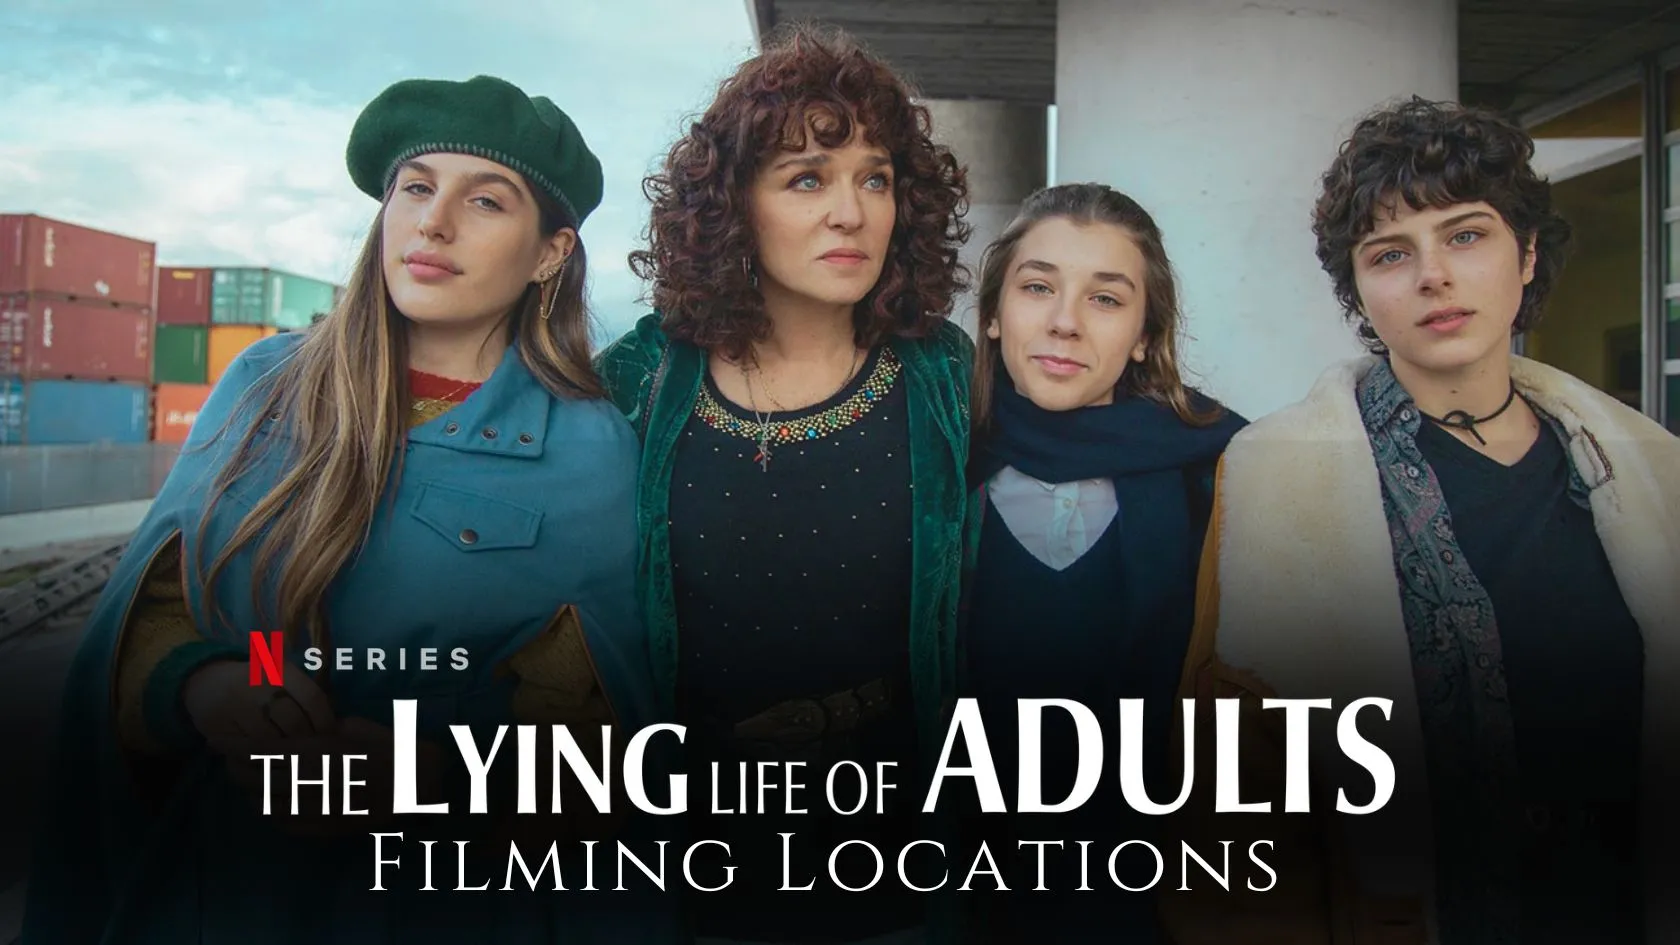 The Lying Life of Adults Filming Locations